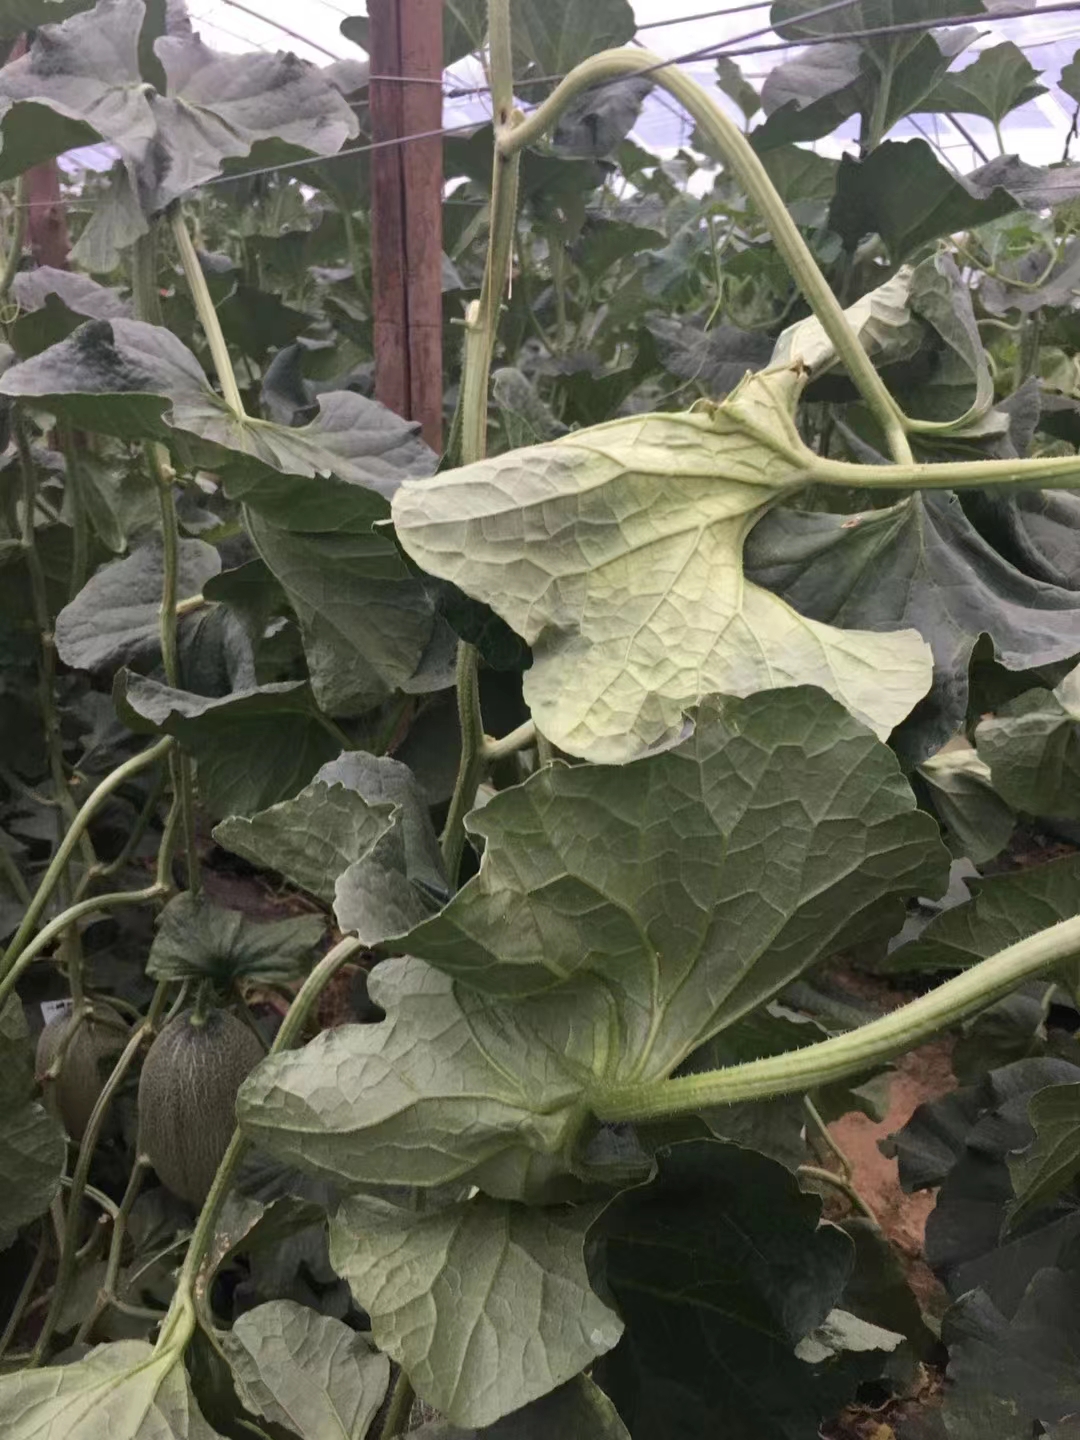 Fairy Valley New Breeding Hybrid F1 Green Peel Oval Sweet Melon Seeds for Growing-Red Crisp No. 5